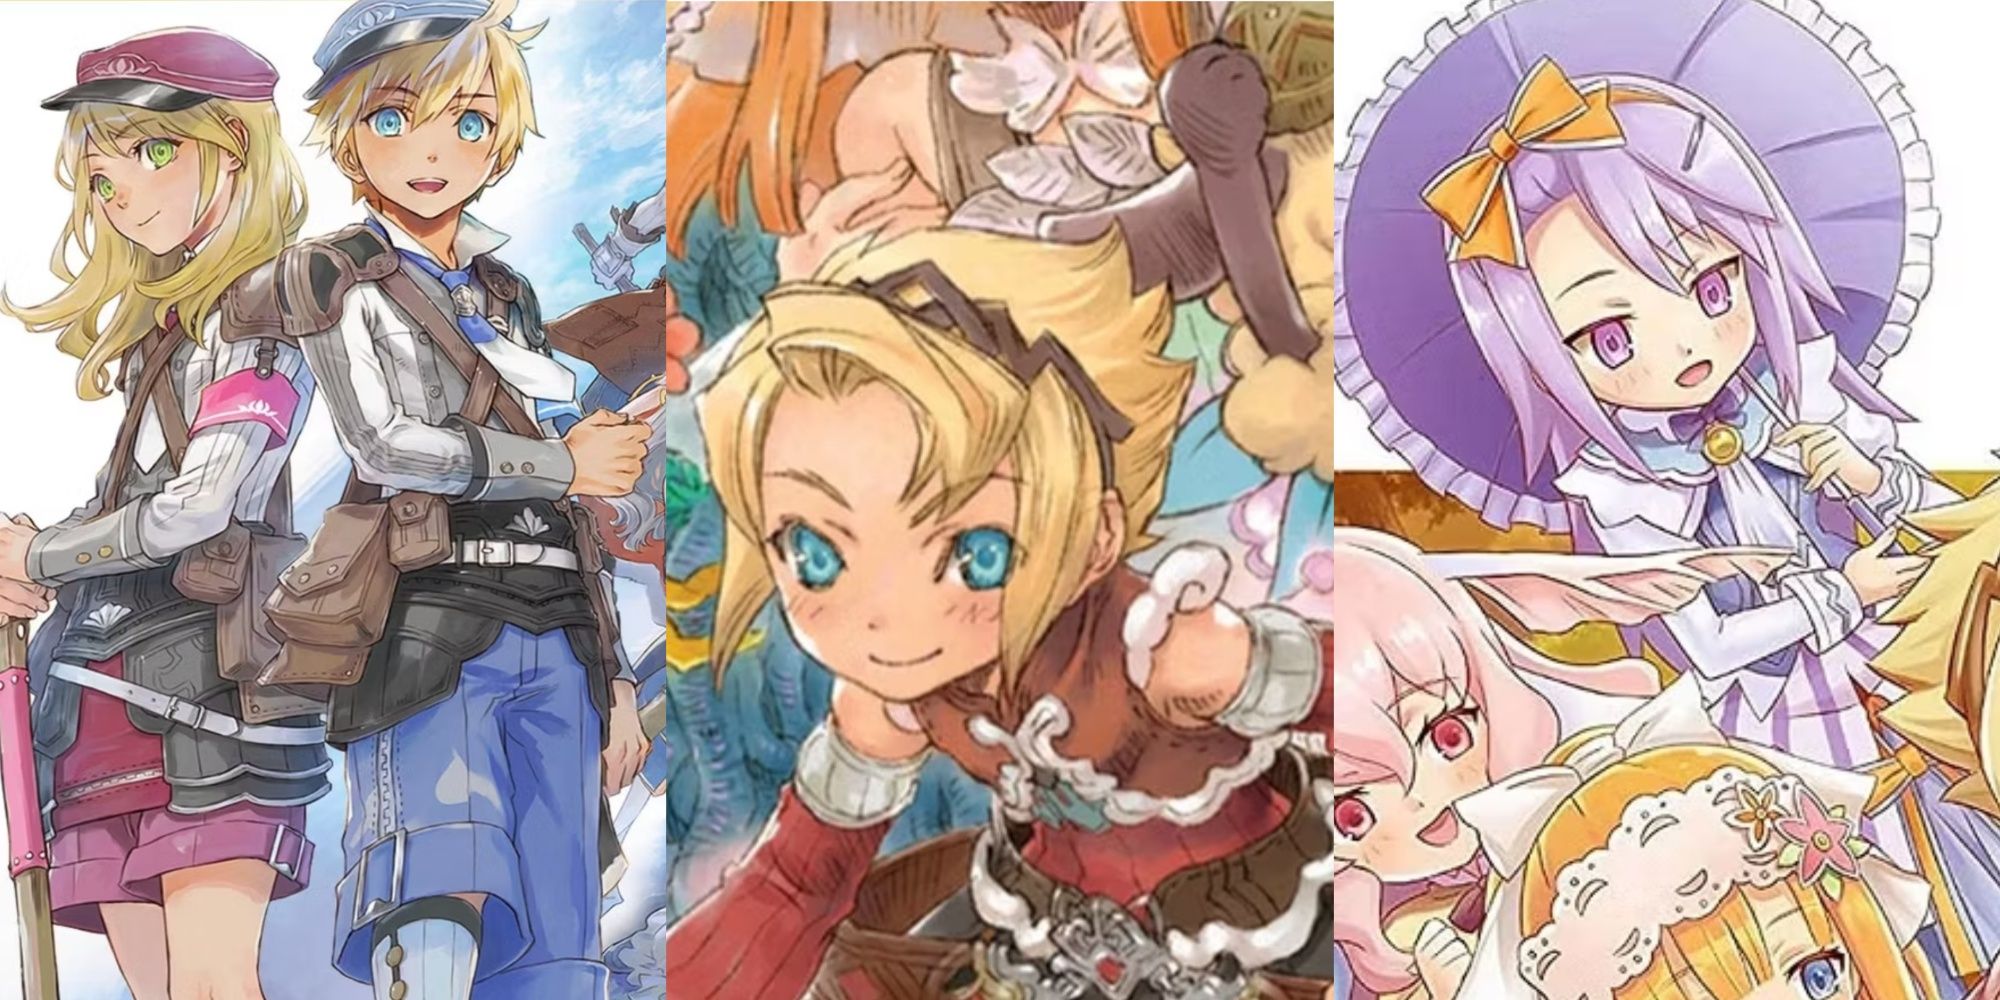 Split images of Rune Factory 5, Rune Factory 3, and Rune Factory 3 Special